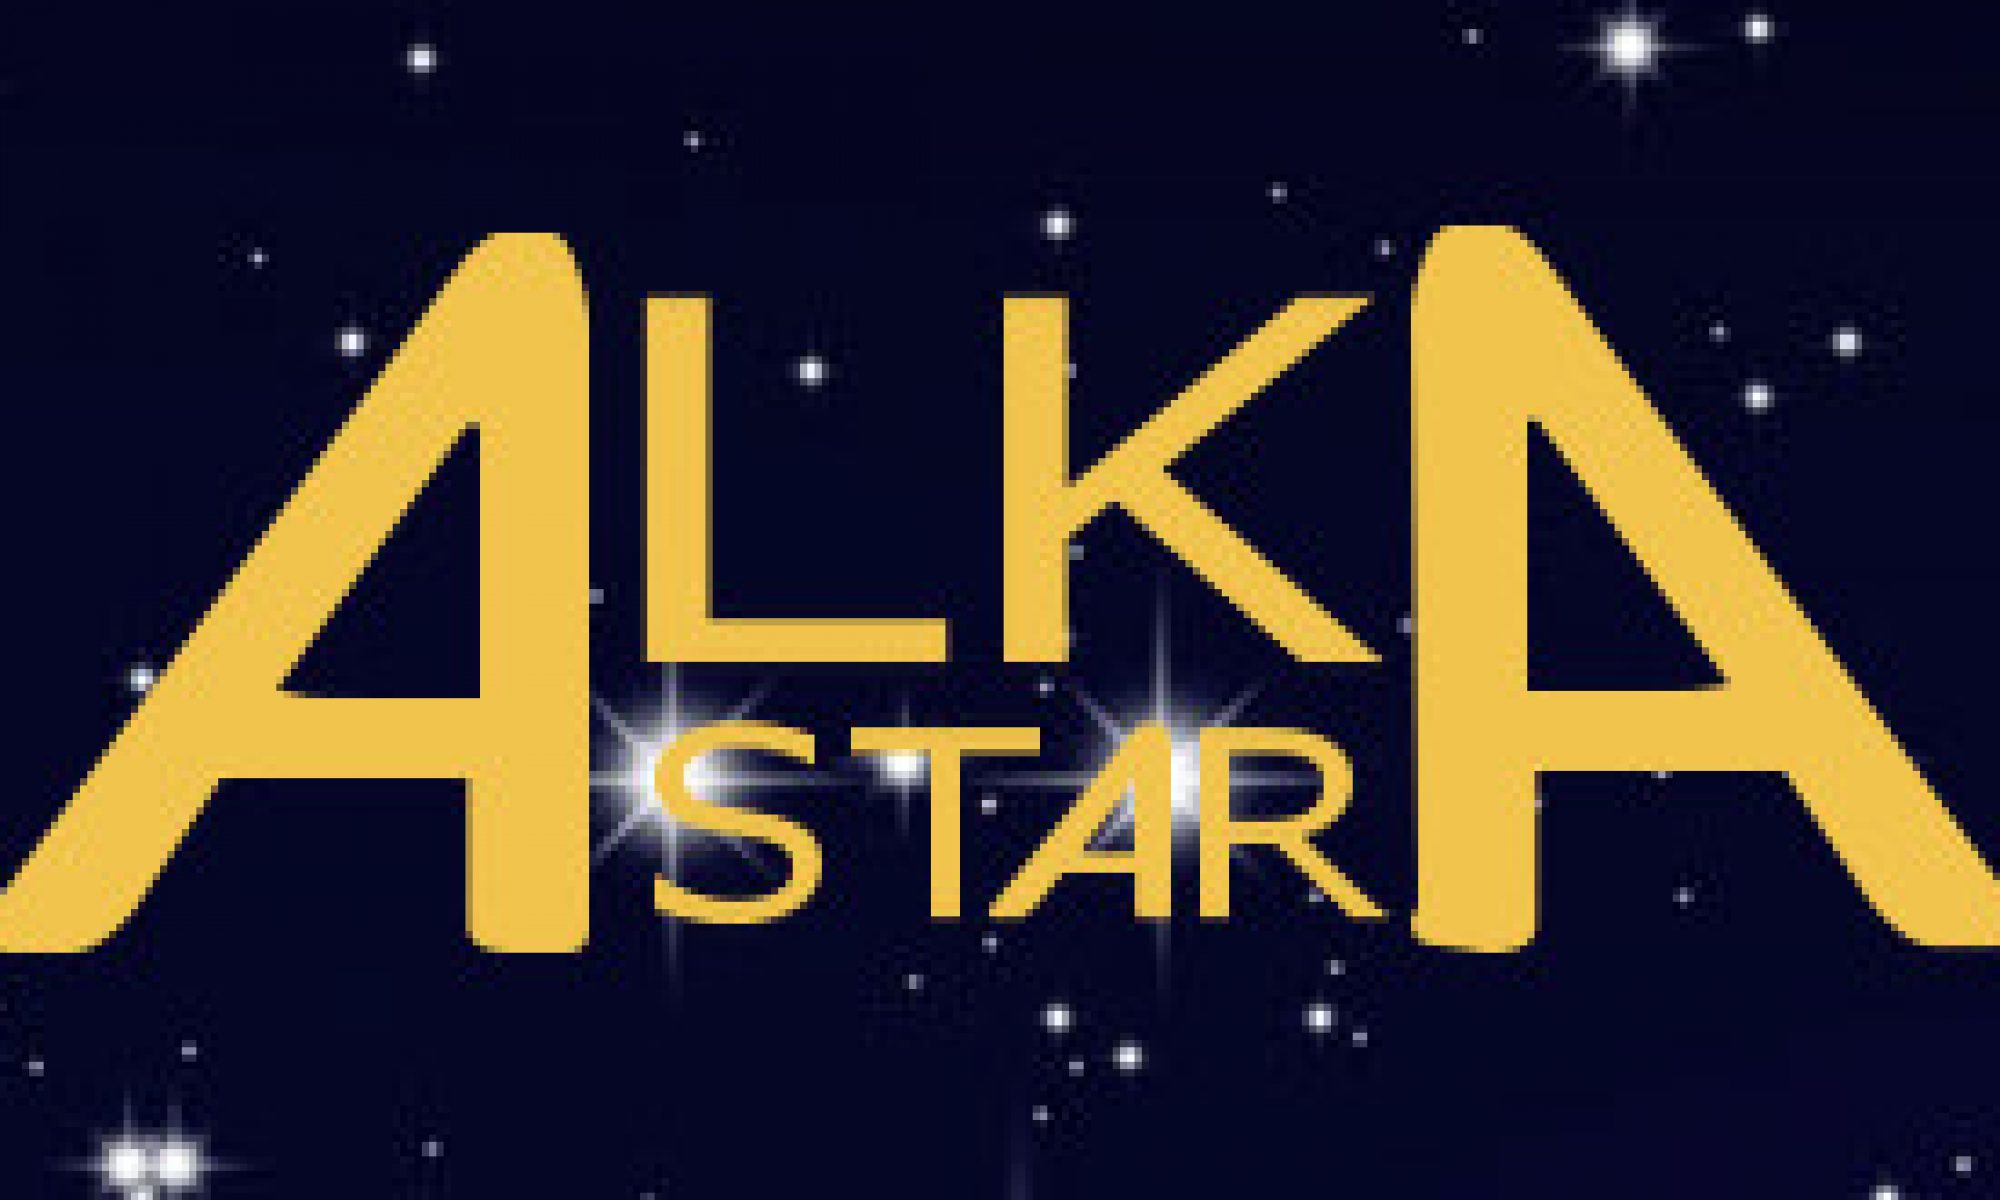 Welcome to alkastar